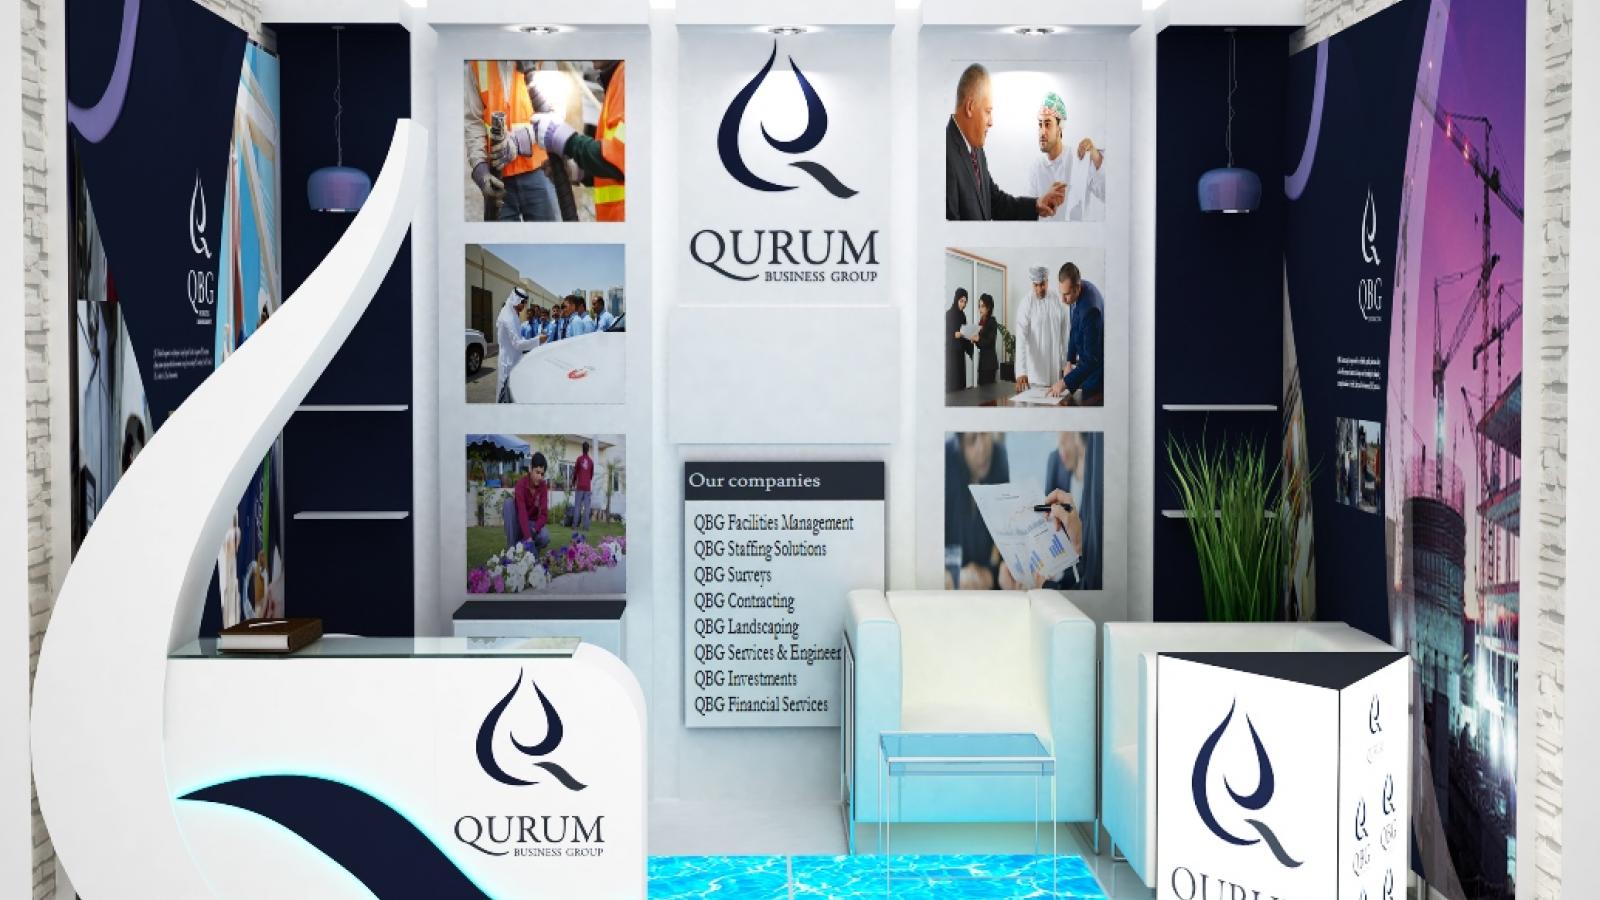 Qurum Business Group Gears Up For Cityscape Global 2015